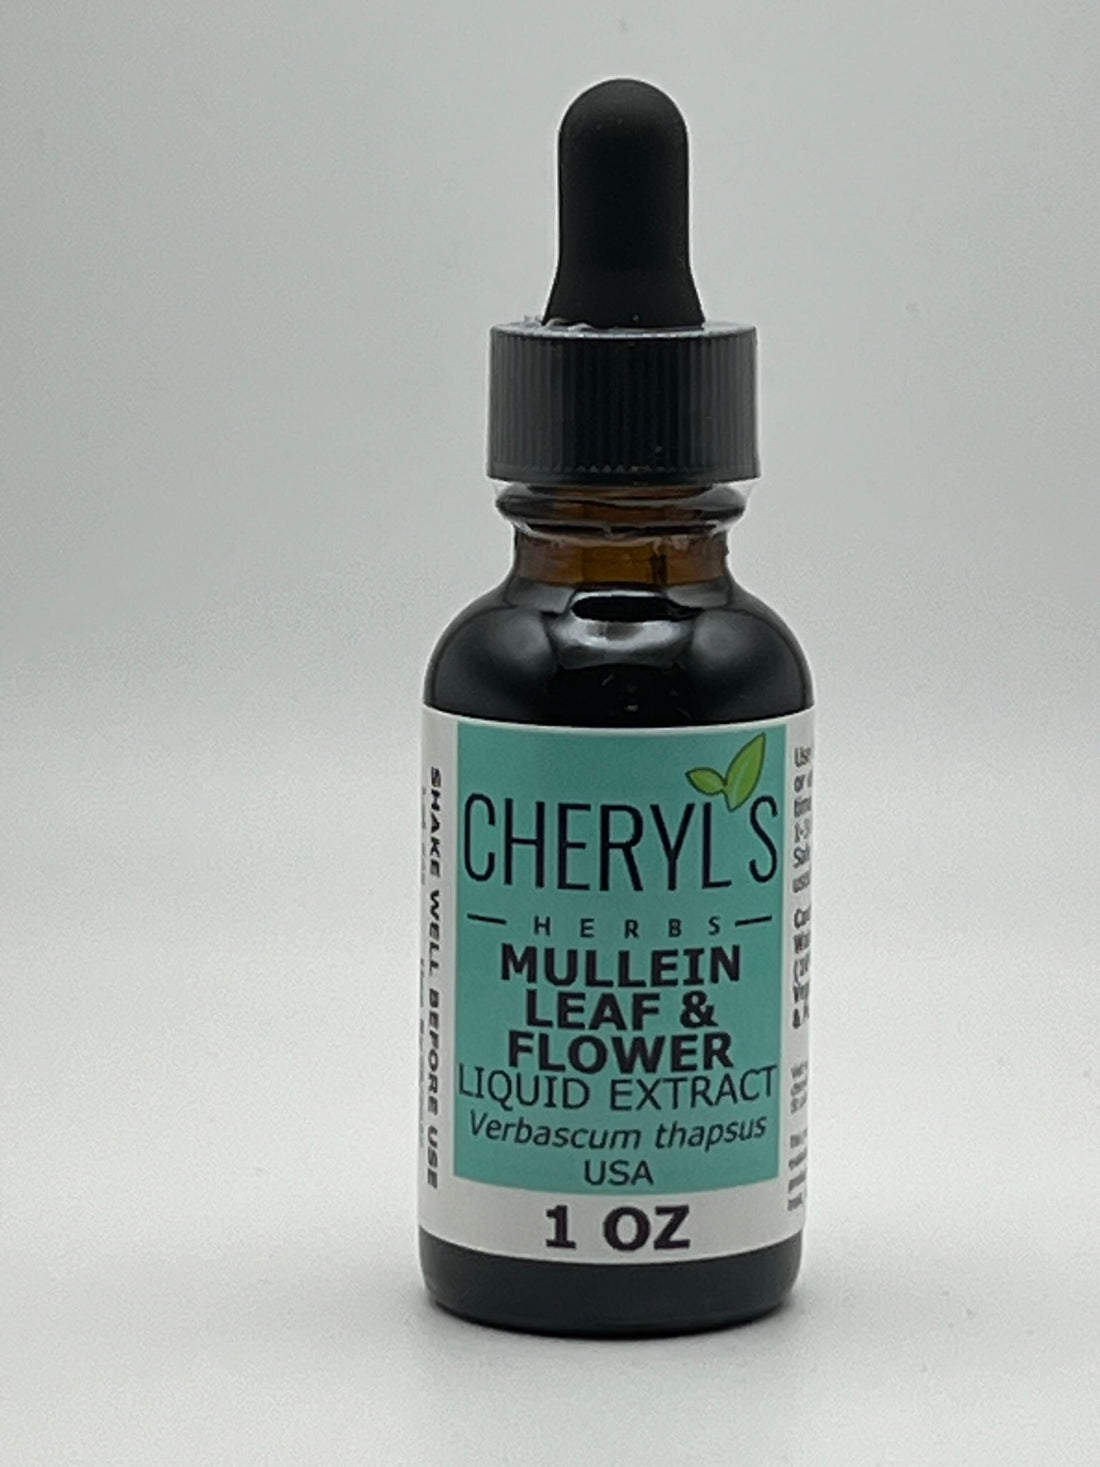 Cheryl's Herbs Mullein Leaf & Flower Liquid Extract bottle with a white background